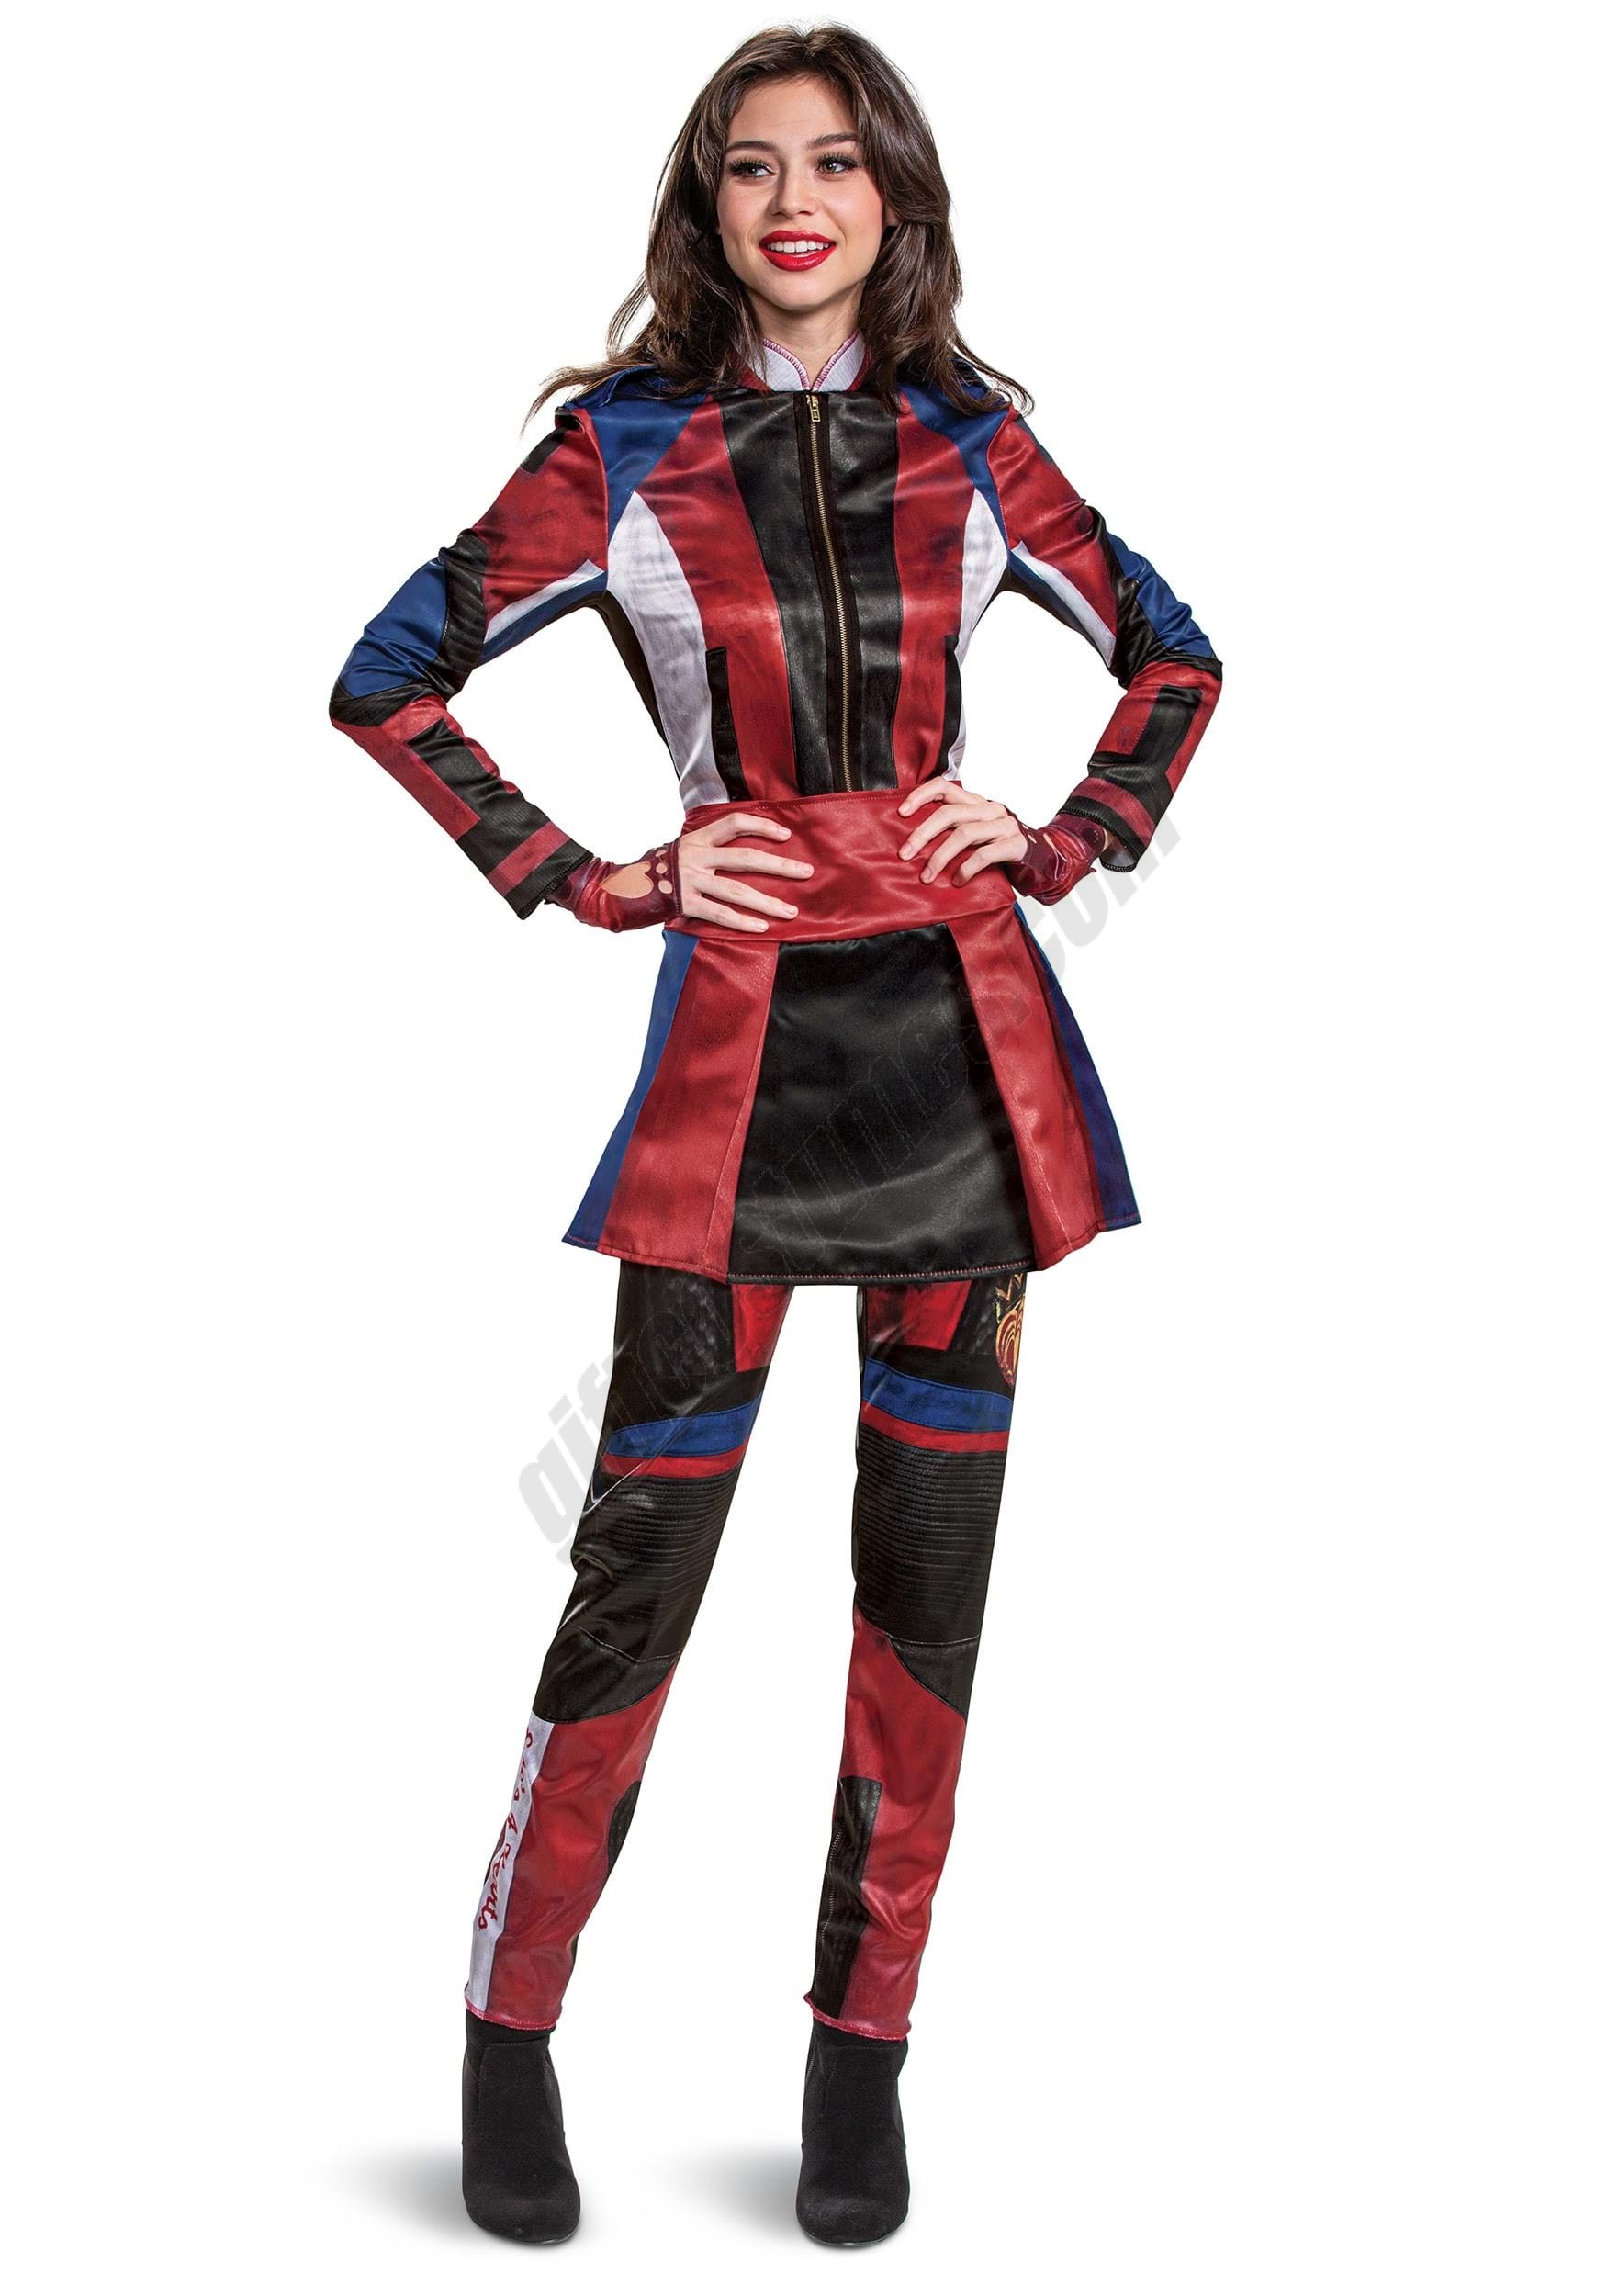 Descendants 3 Evie Deluxe Costume for Adults Promotions - Descendants 3 Evie Deluxe Costume for Adults Promotions